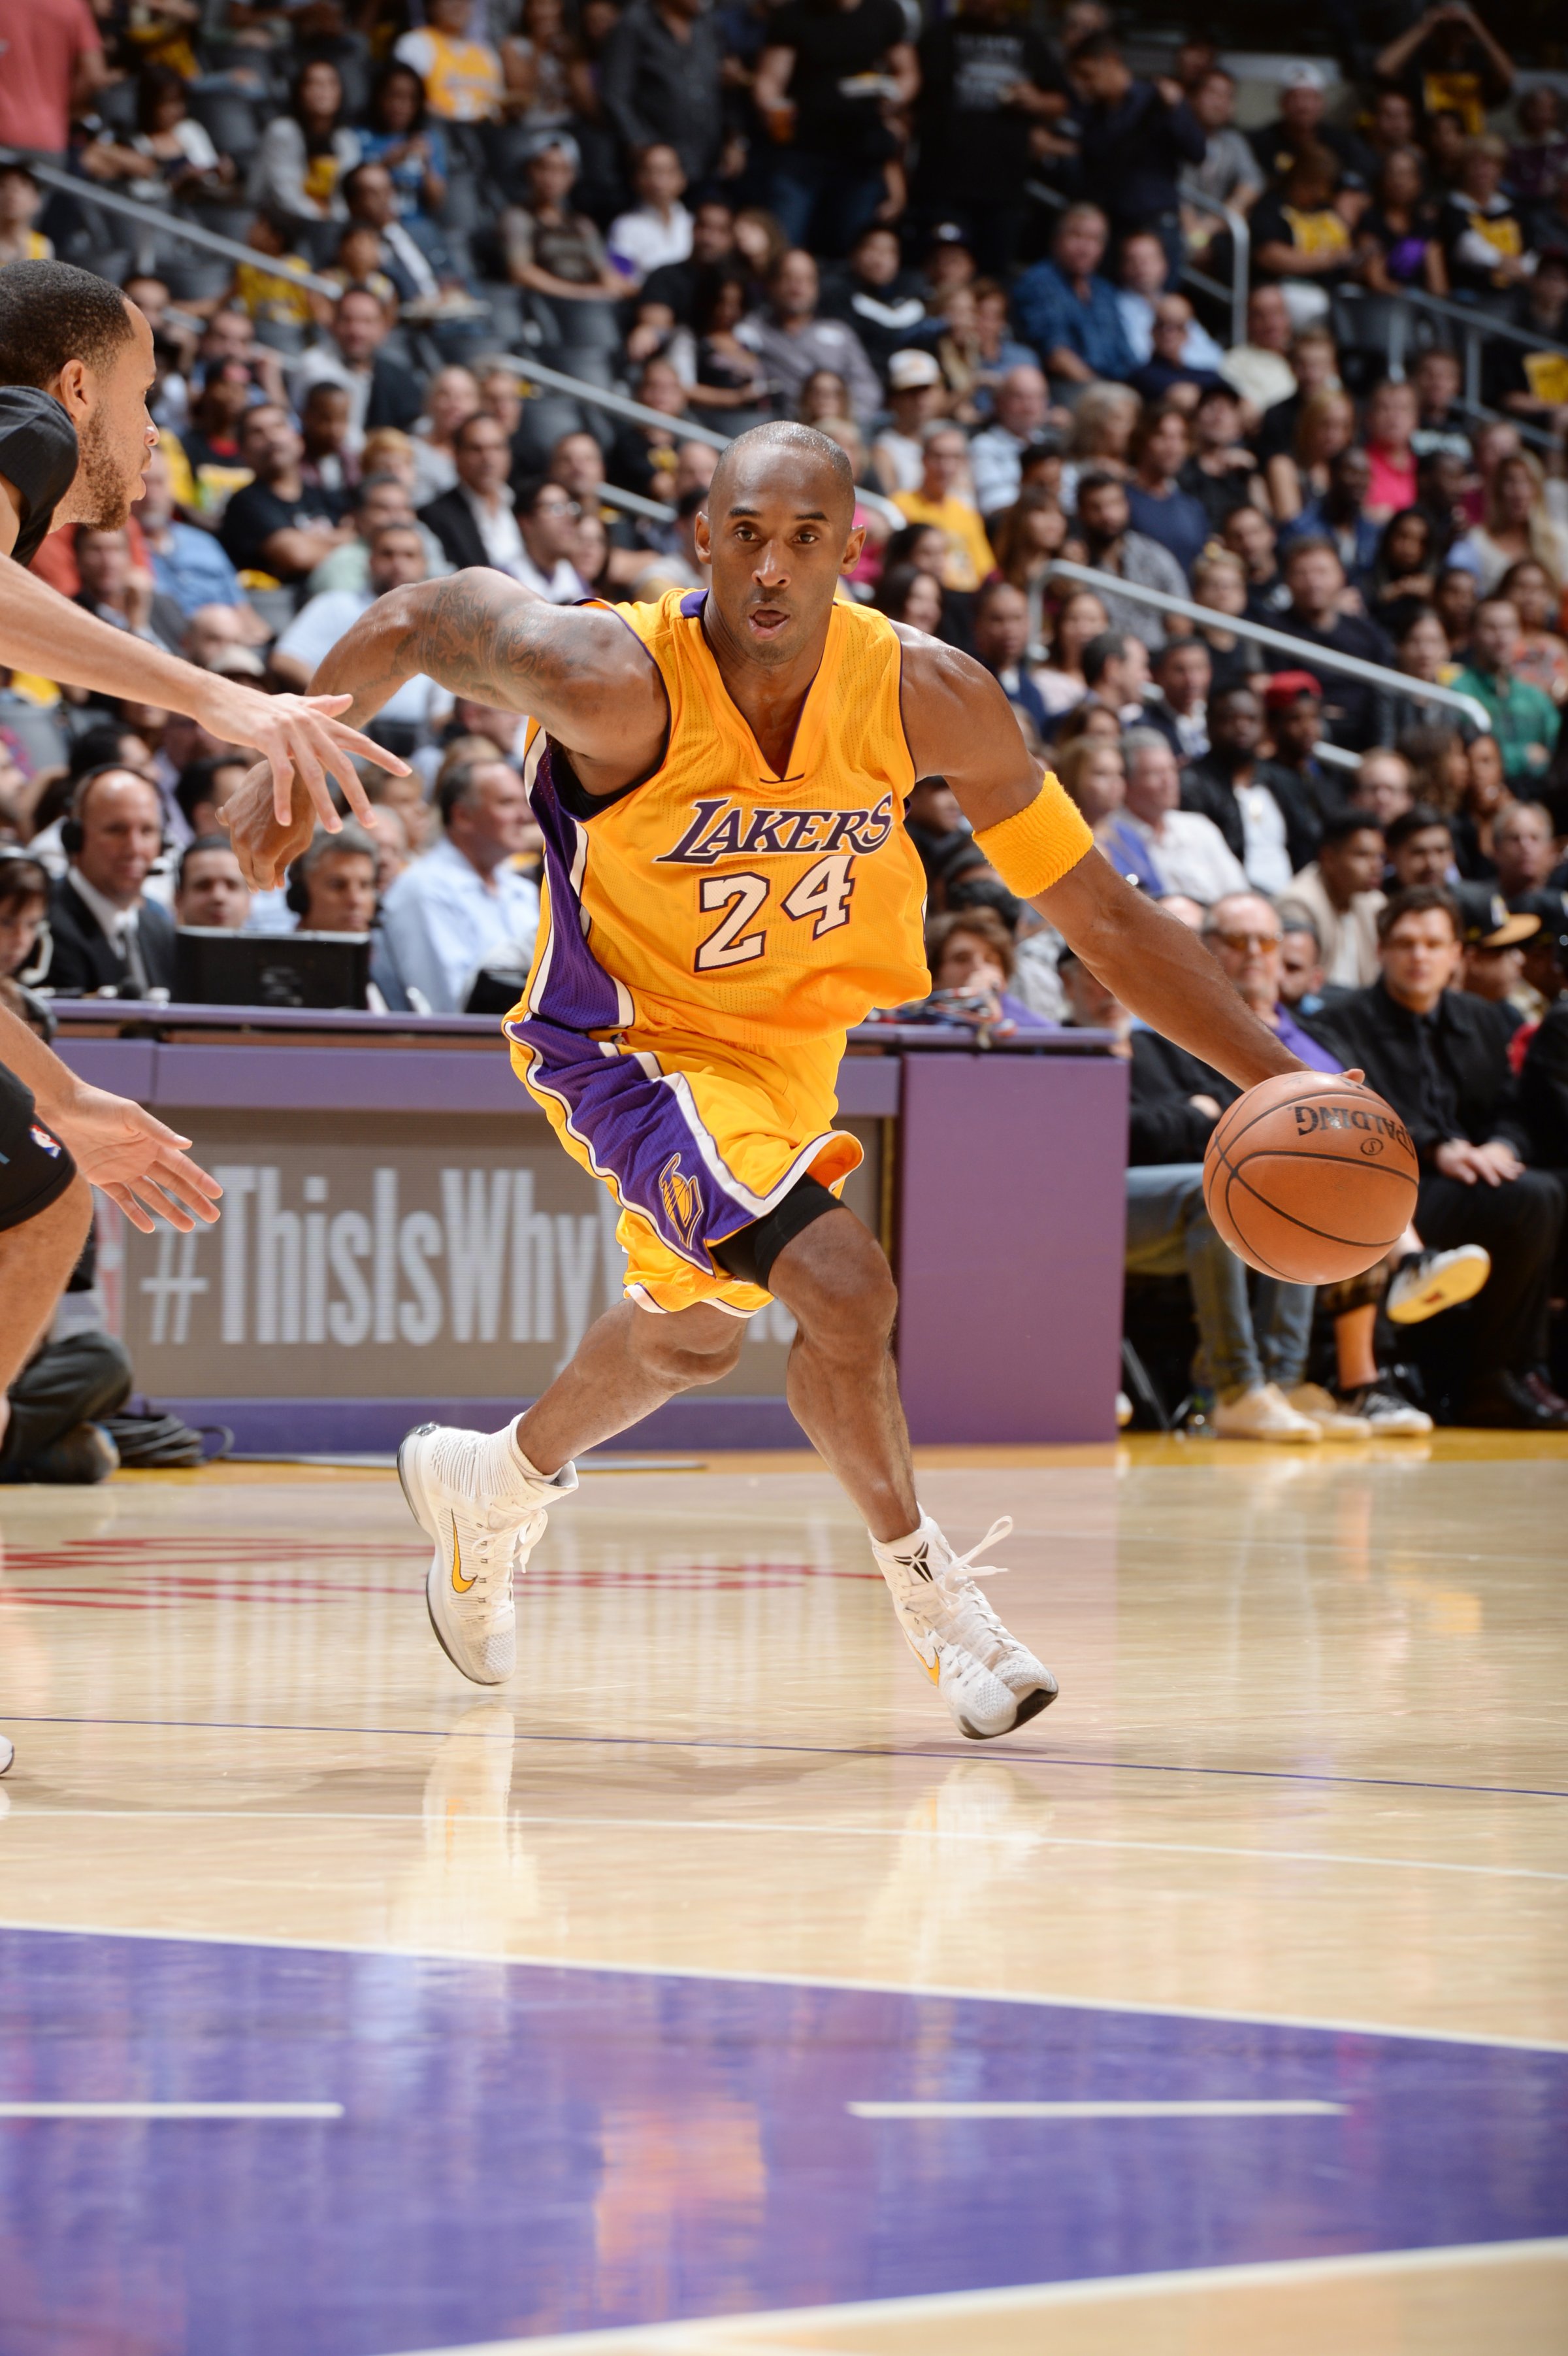 LOS ANGELES, CA - OCTOBER 28:  Kobe Bryant #24 of the Los Angeles Lakers handles the ball against the Minnesota Timberwolves on October 28, 2015 at STAPLES Center in Los Angeles, California. NOTE TO USER: User expressly acknowledges and agrees that, by downloading and/or using this Photograph, user is consenting to the terms and conditions of the Getty Images License Agreement. Mandatory Copyright Notice: Copyright 2015 NBAE (Photo by Andrew D. Bernstein/NBAE via Getty Images)